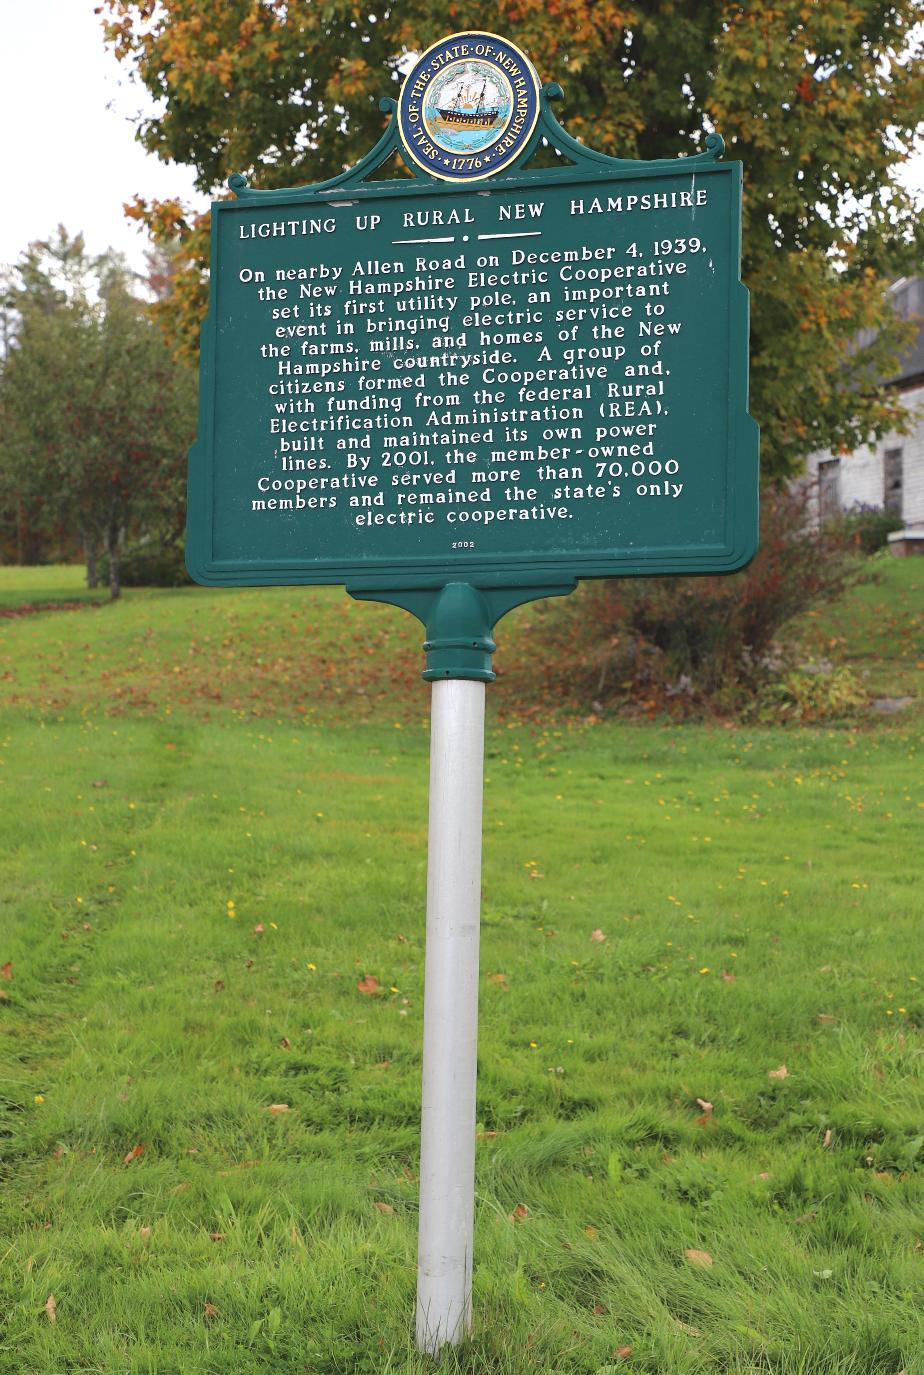 Lempster NH Historical Marker - Lighting Up Rural New Hampshire